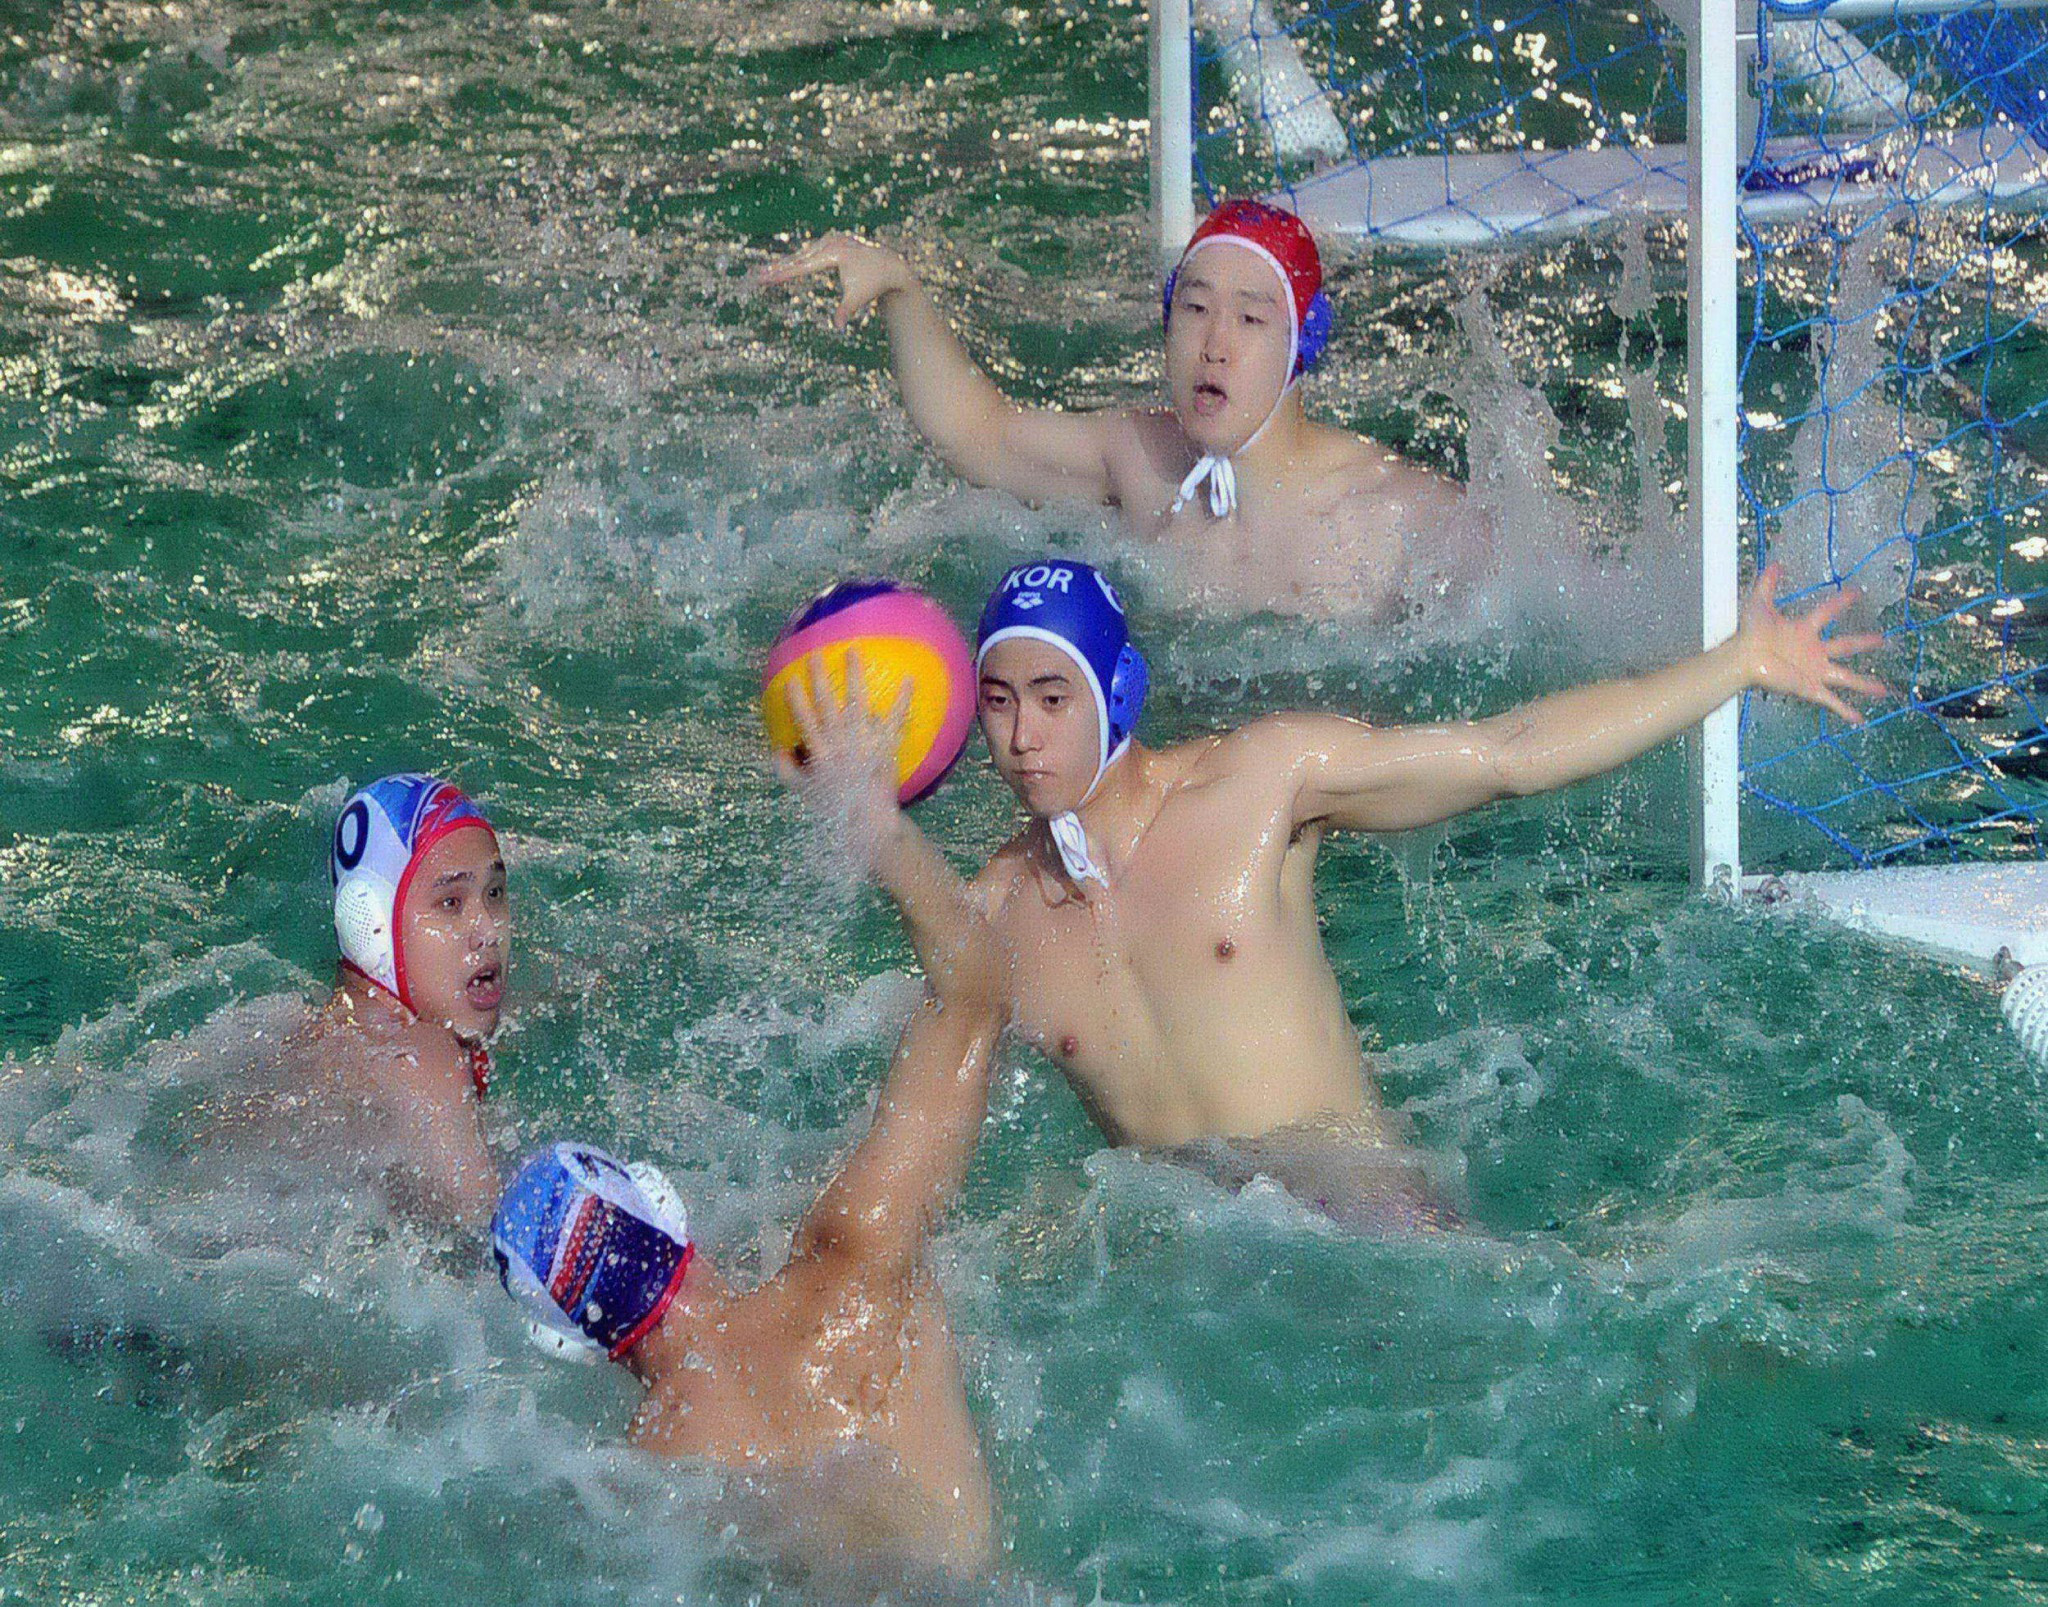 Both the men's and women's water polo tournaments began today ©Taipei 2017